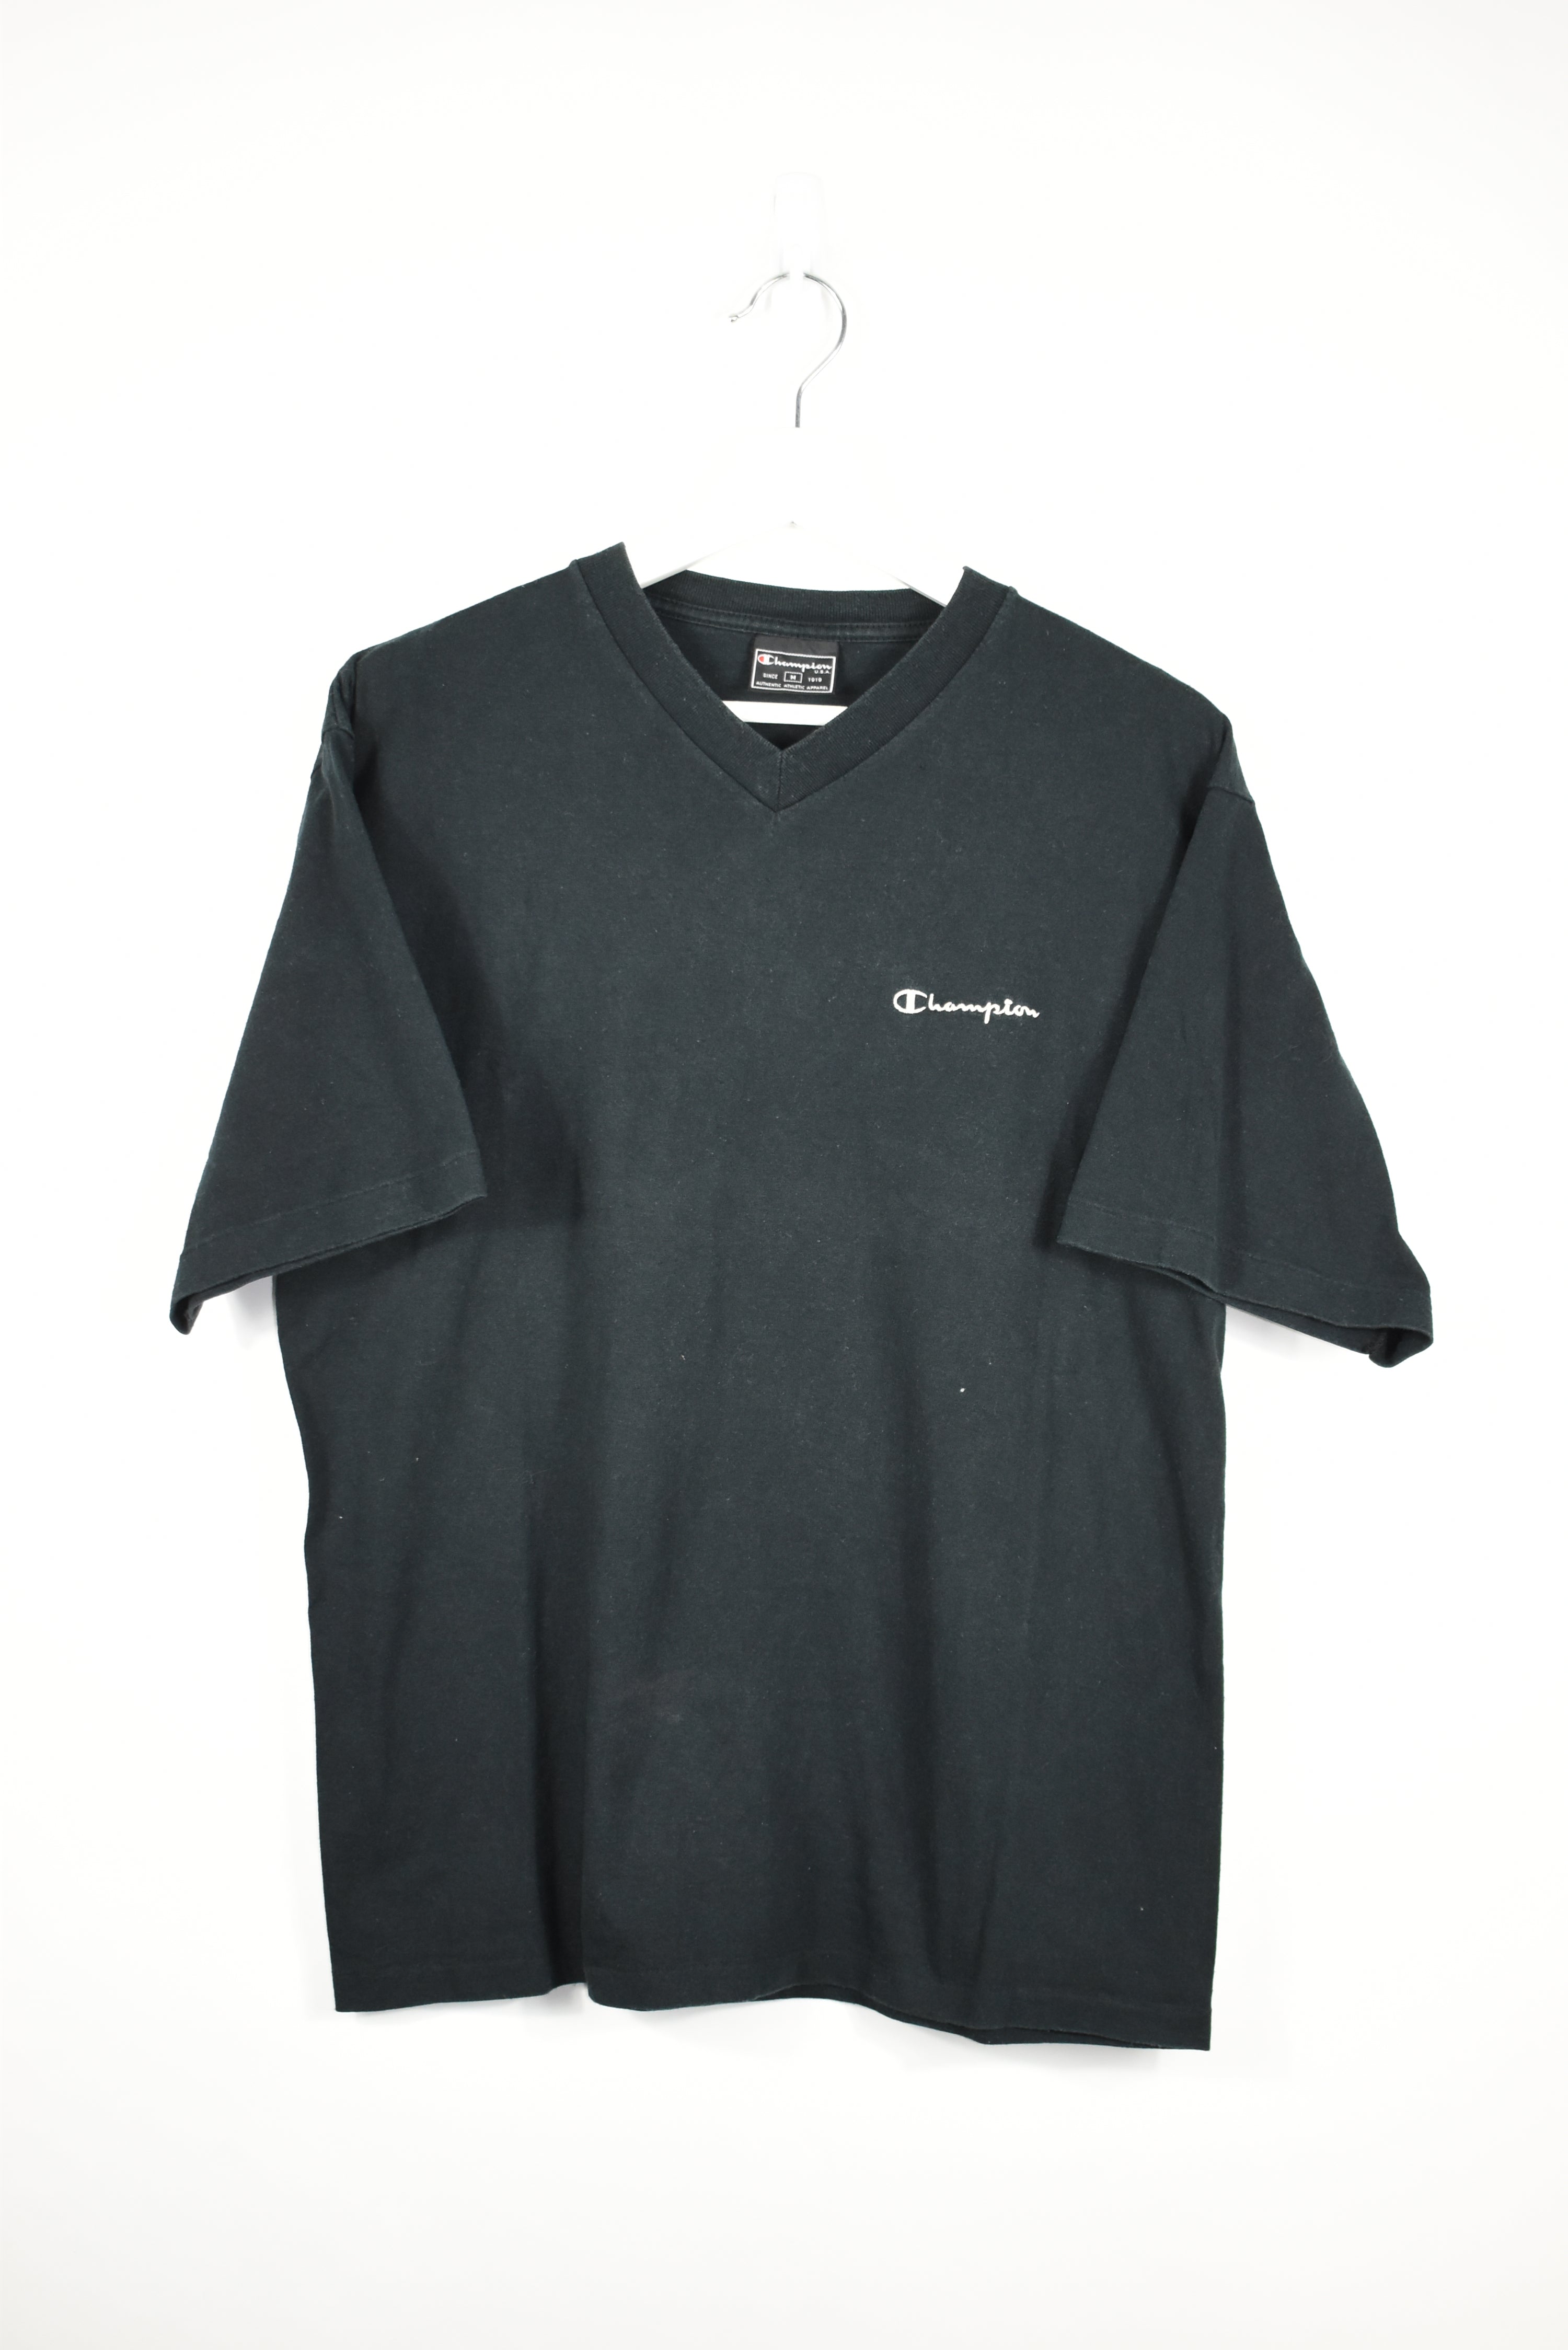 Vintage Champion Embroidery Small Logo Tee Large